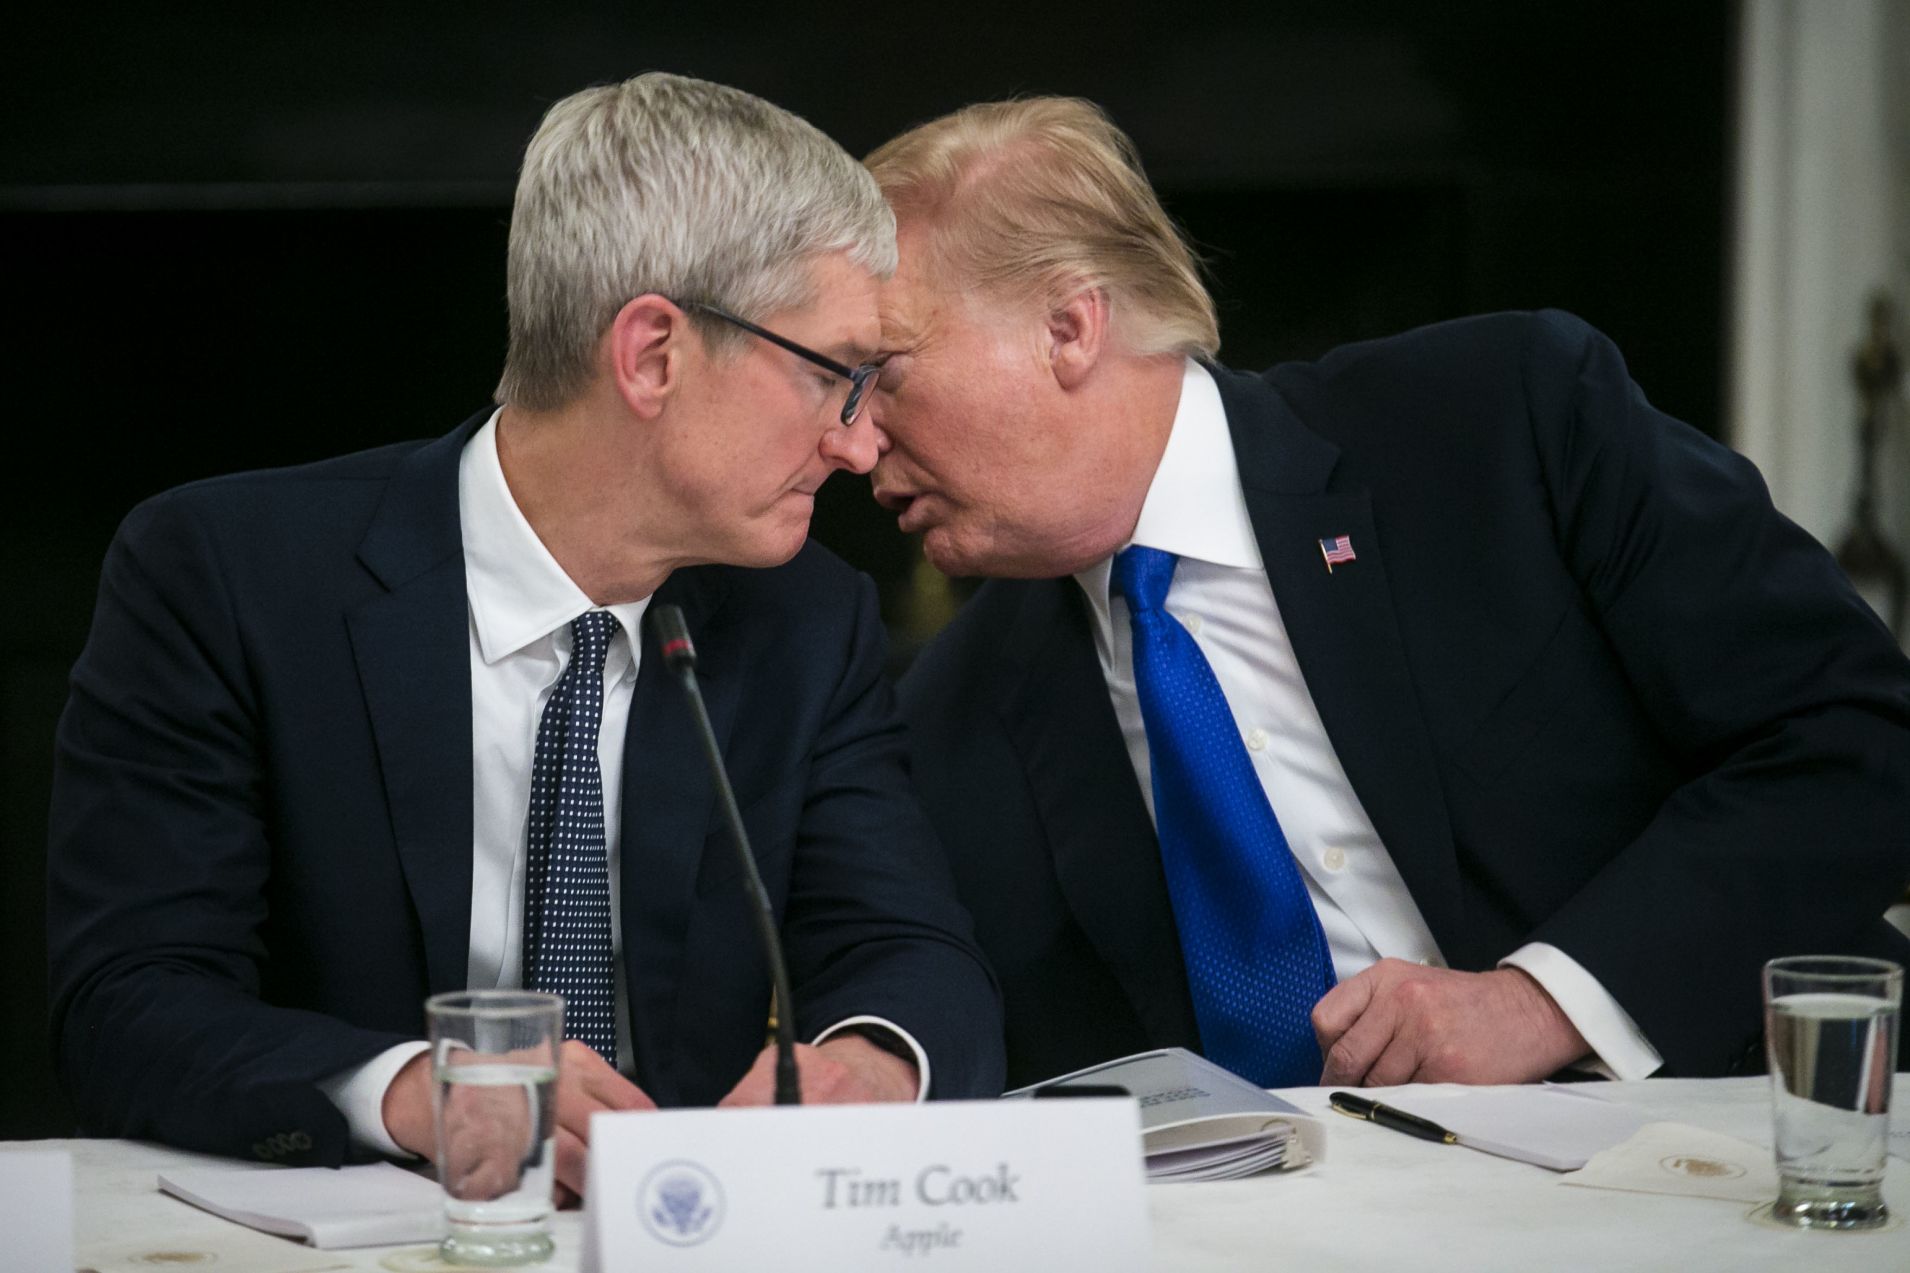 Trump Says He Talked to Apple CEO Tim Cook About Tariffs and Samsung